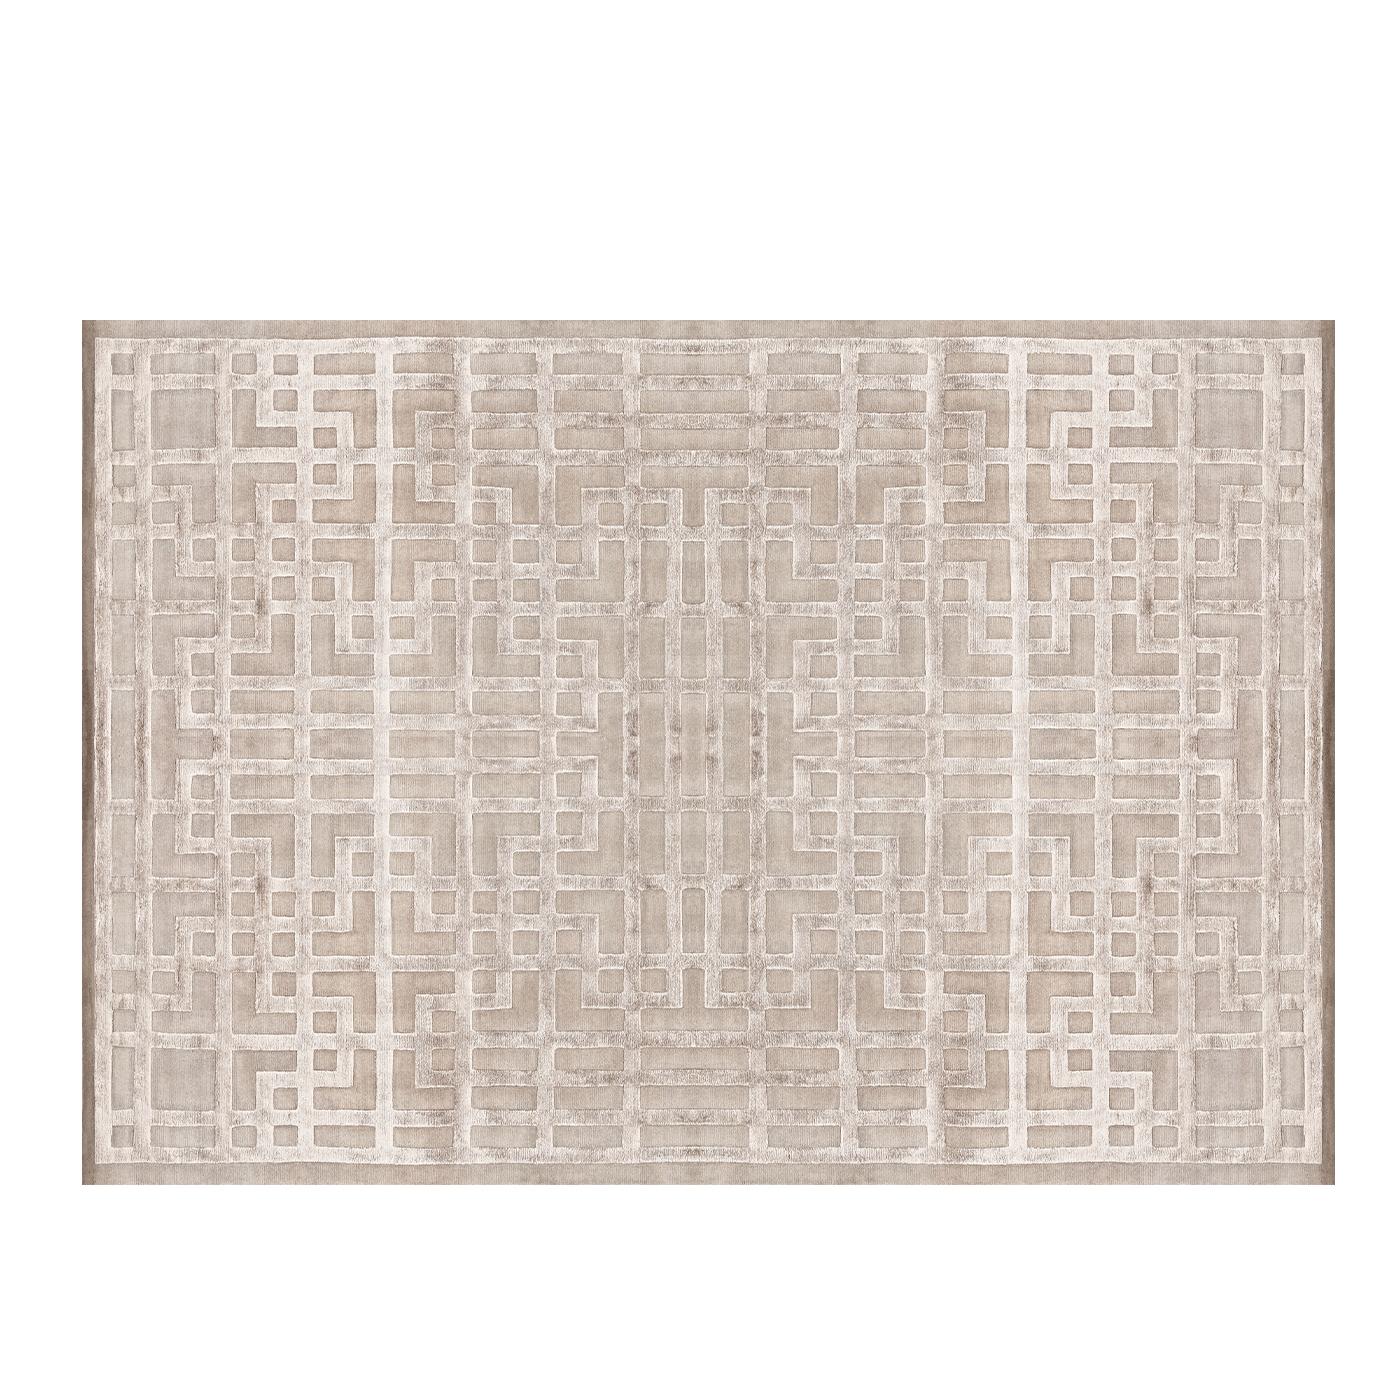 Marked by an intricate and stunning design recalling a labyrinth, this precious rug will effortlessly blend into a modern interior. Its sober and soft silhouette is achieved thanks to the manual work of Nepalese master weavers using 50% of silk and